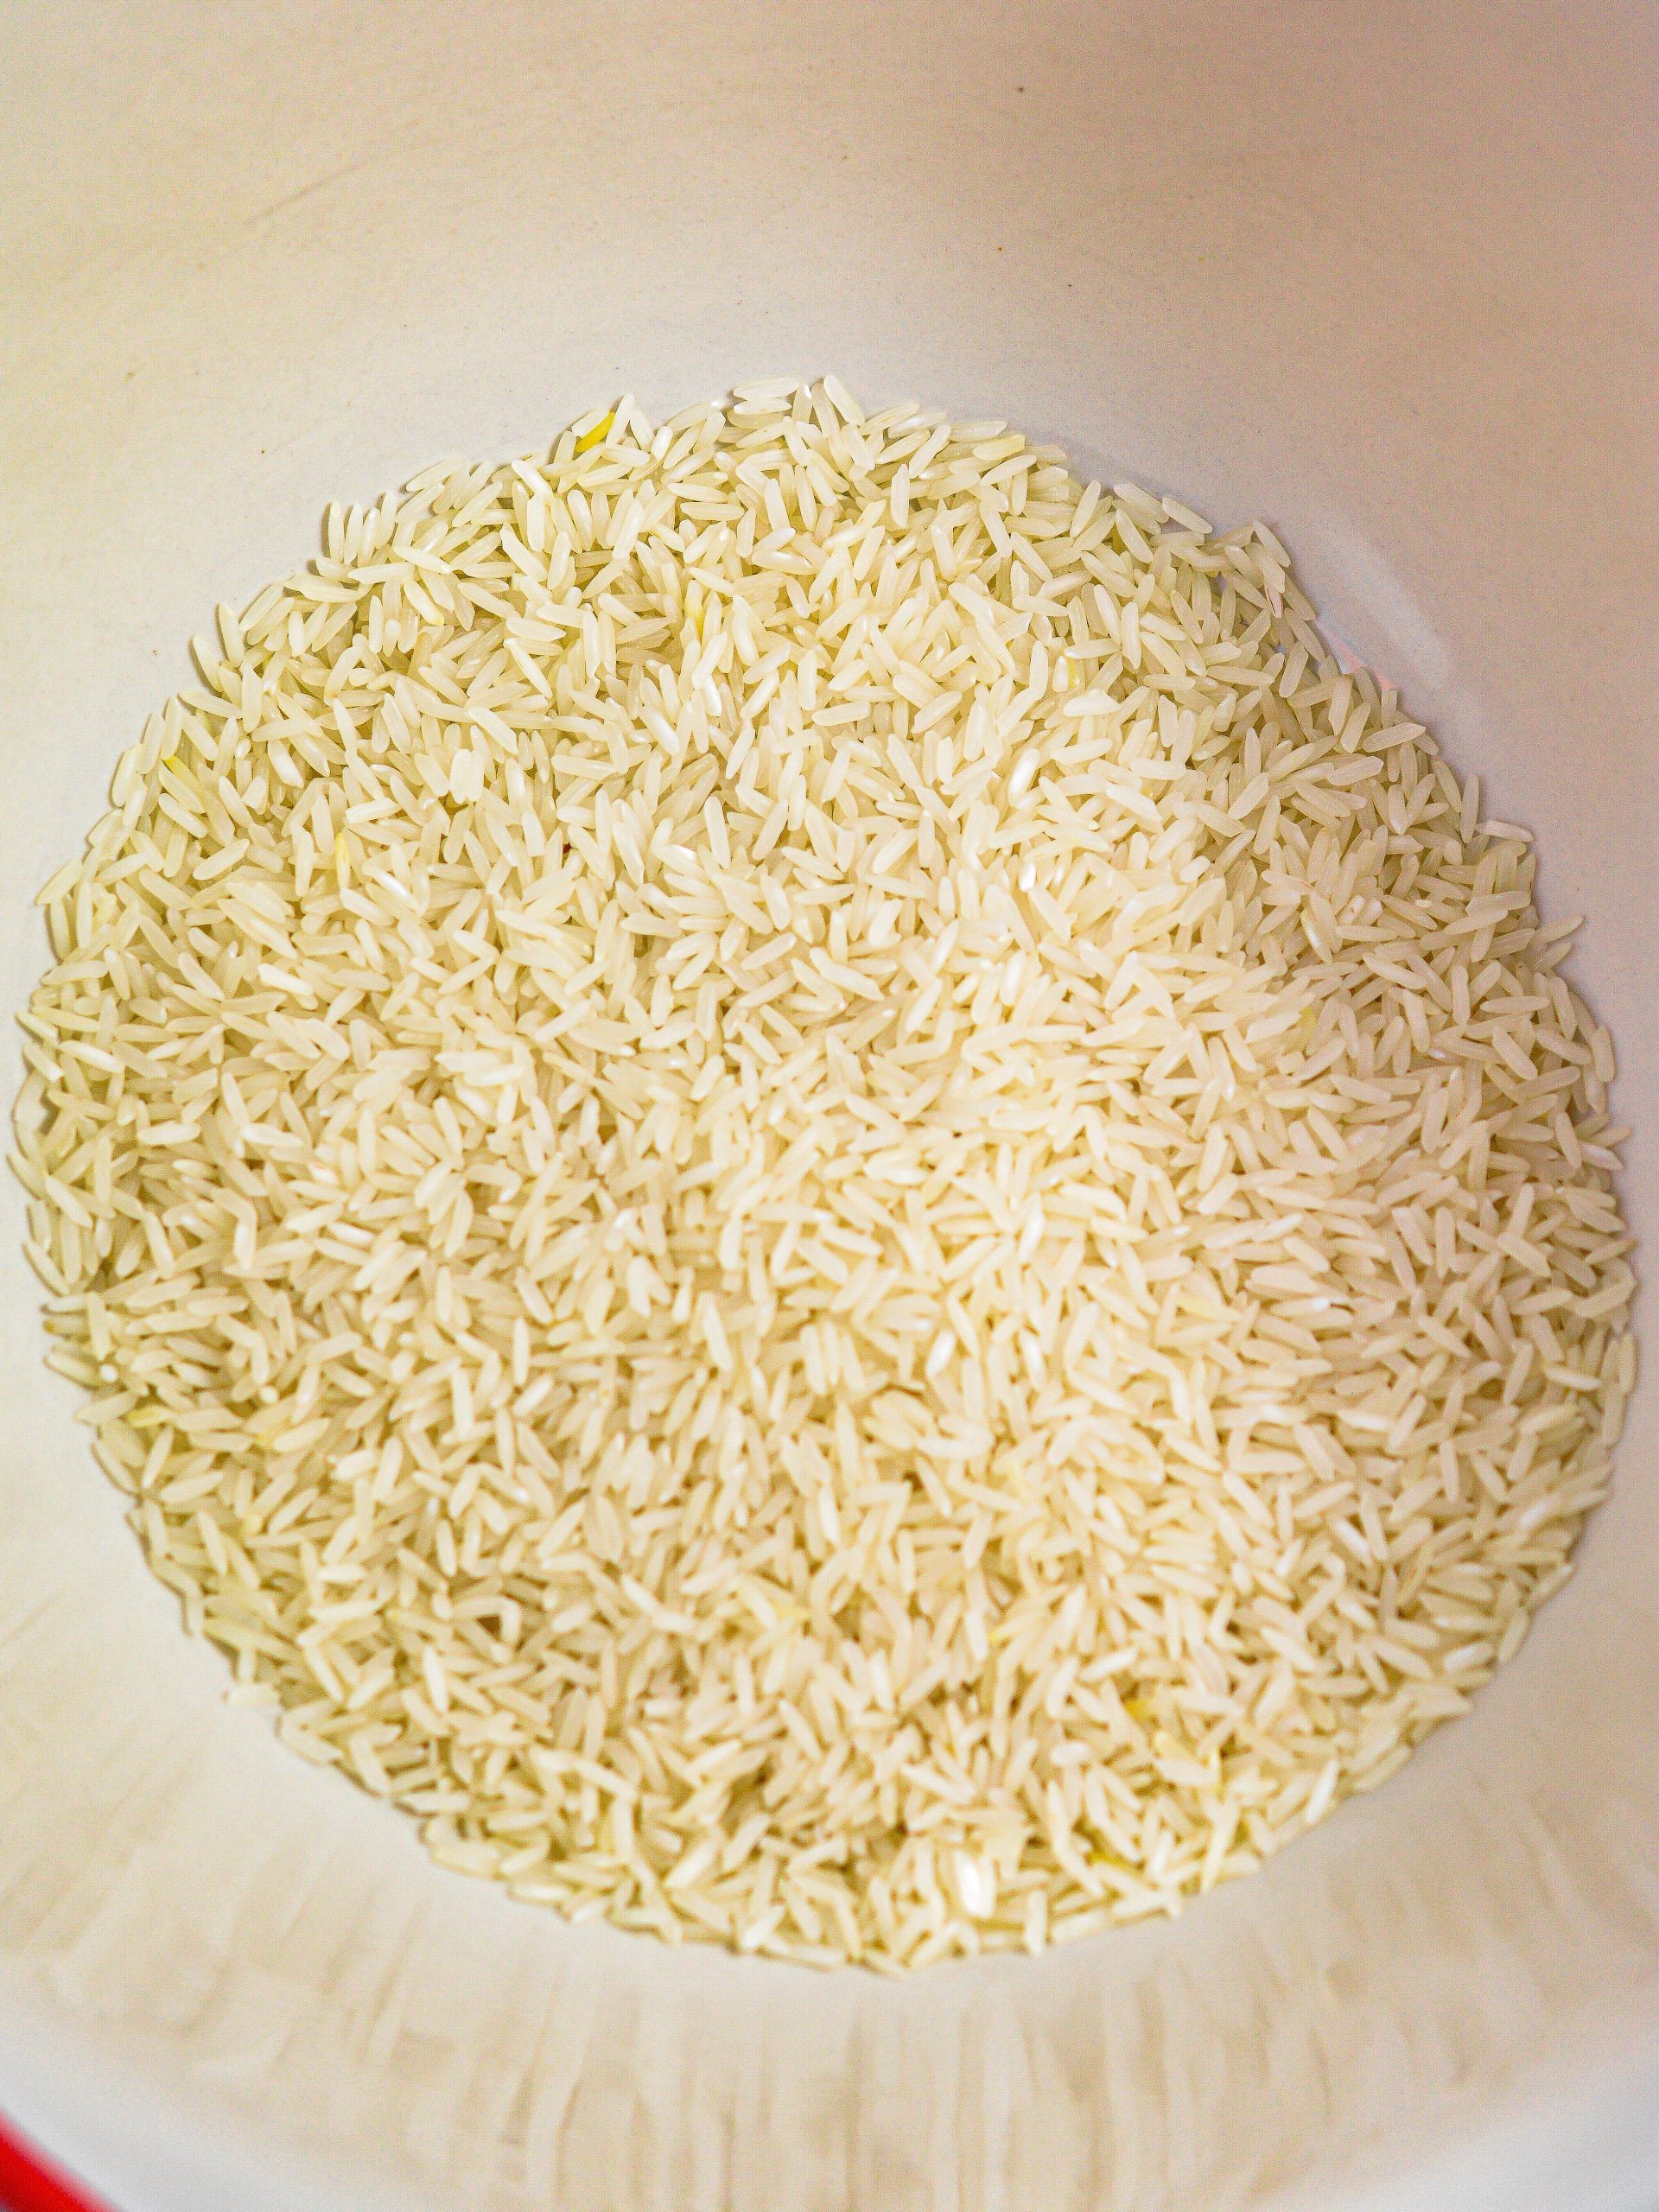 In a bowl, add rice.